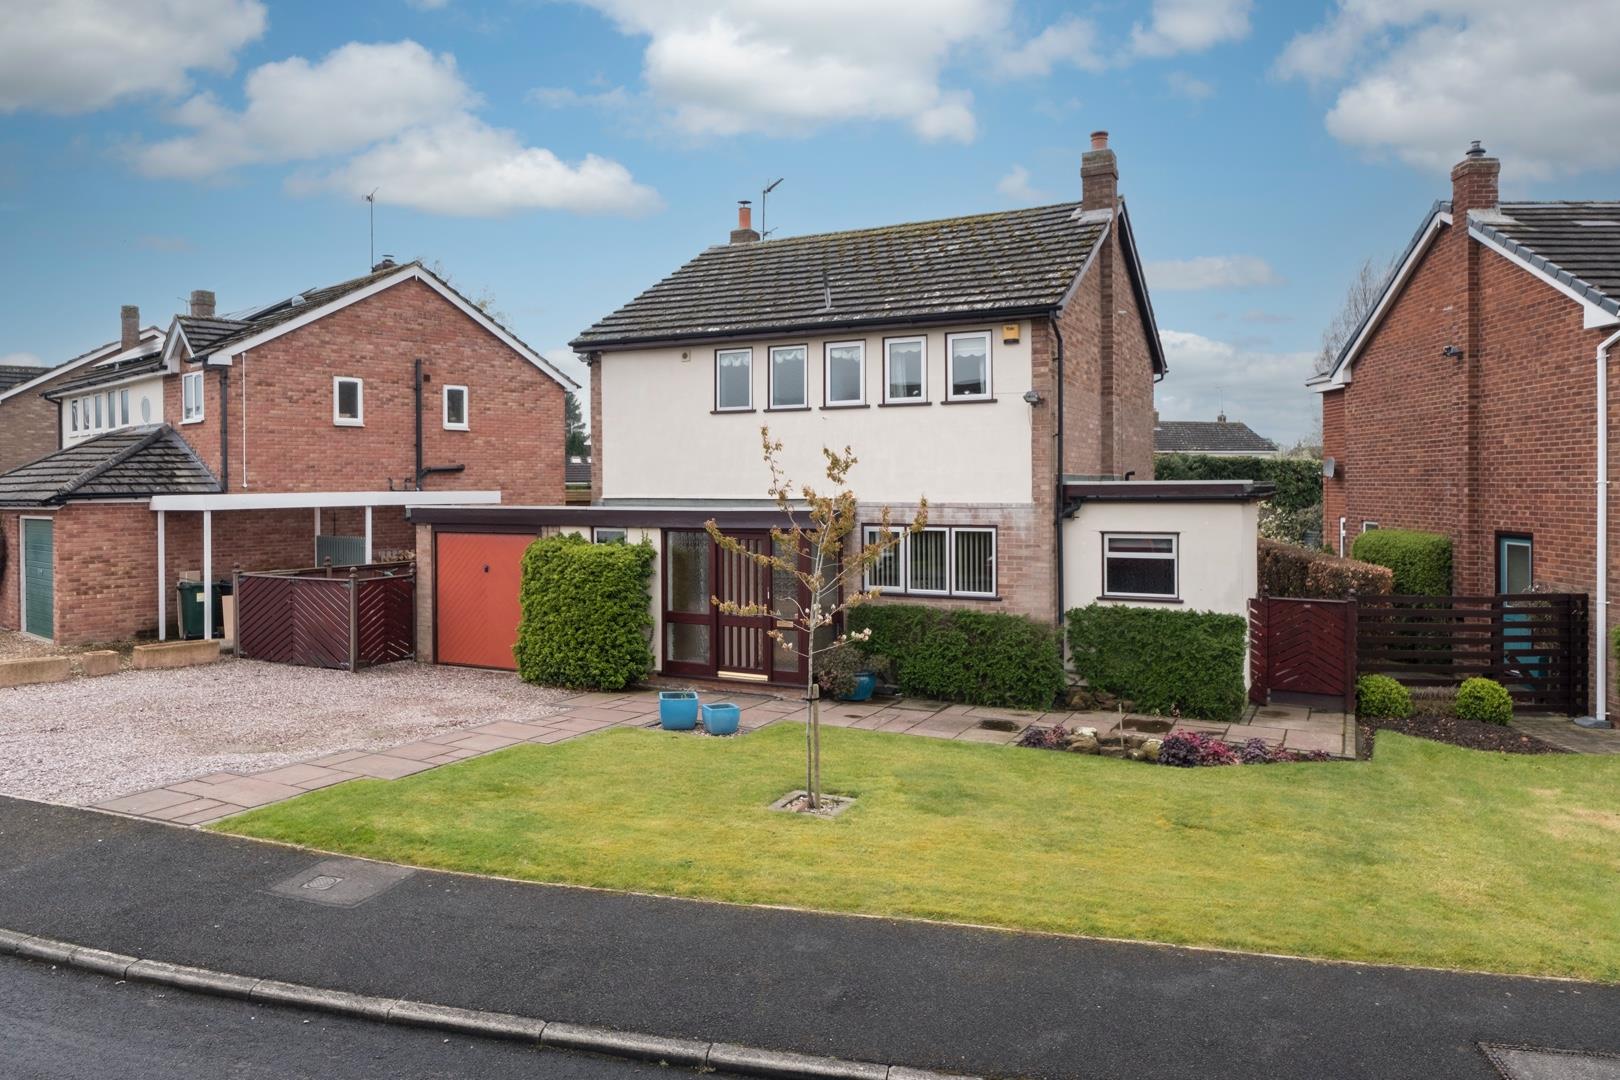 3 bedroom  Detached House for Sale in Tattenhall